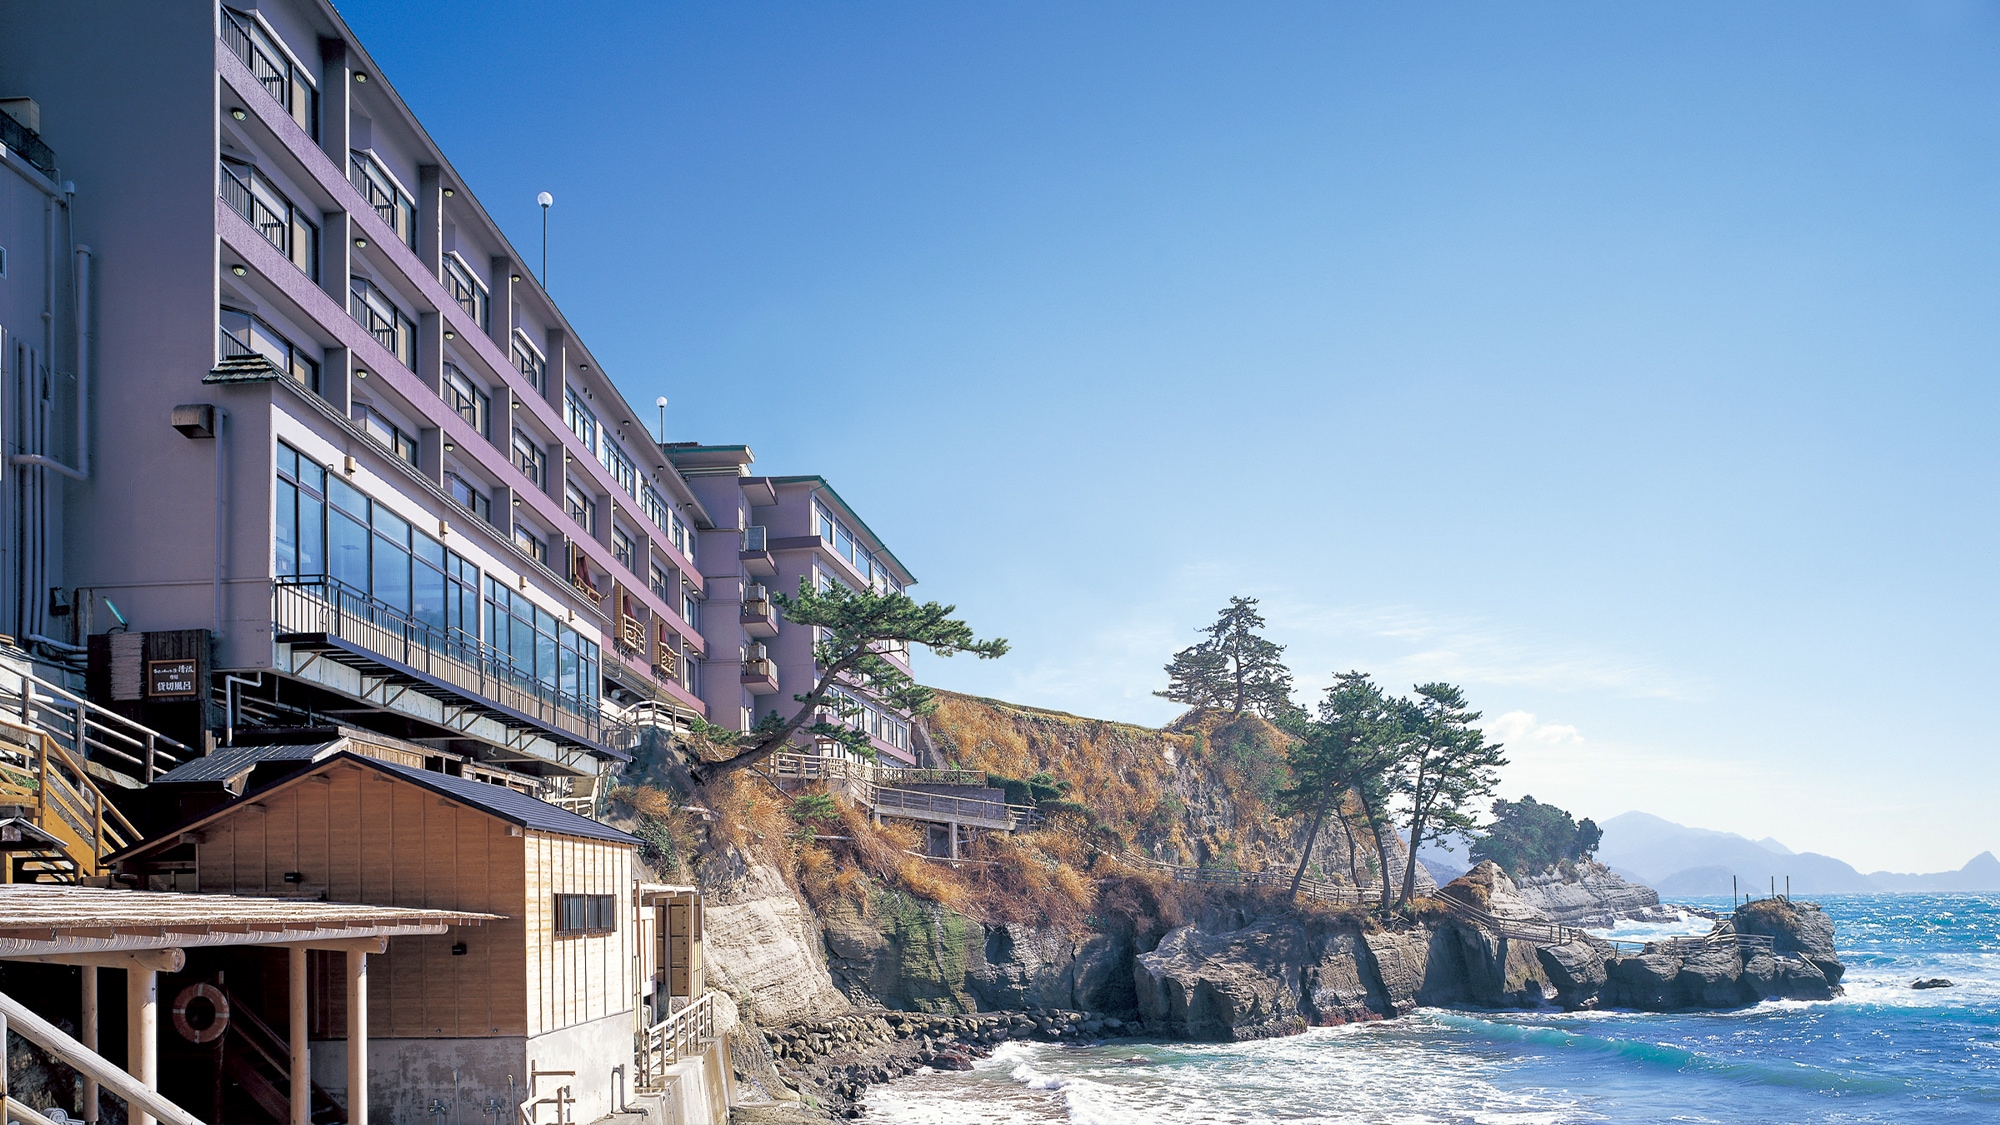 ■ All rooms have a panoramic view of the sea! Kakure hot water on the beach, Kakure inn.